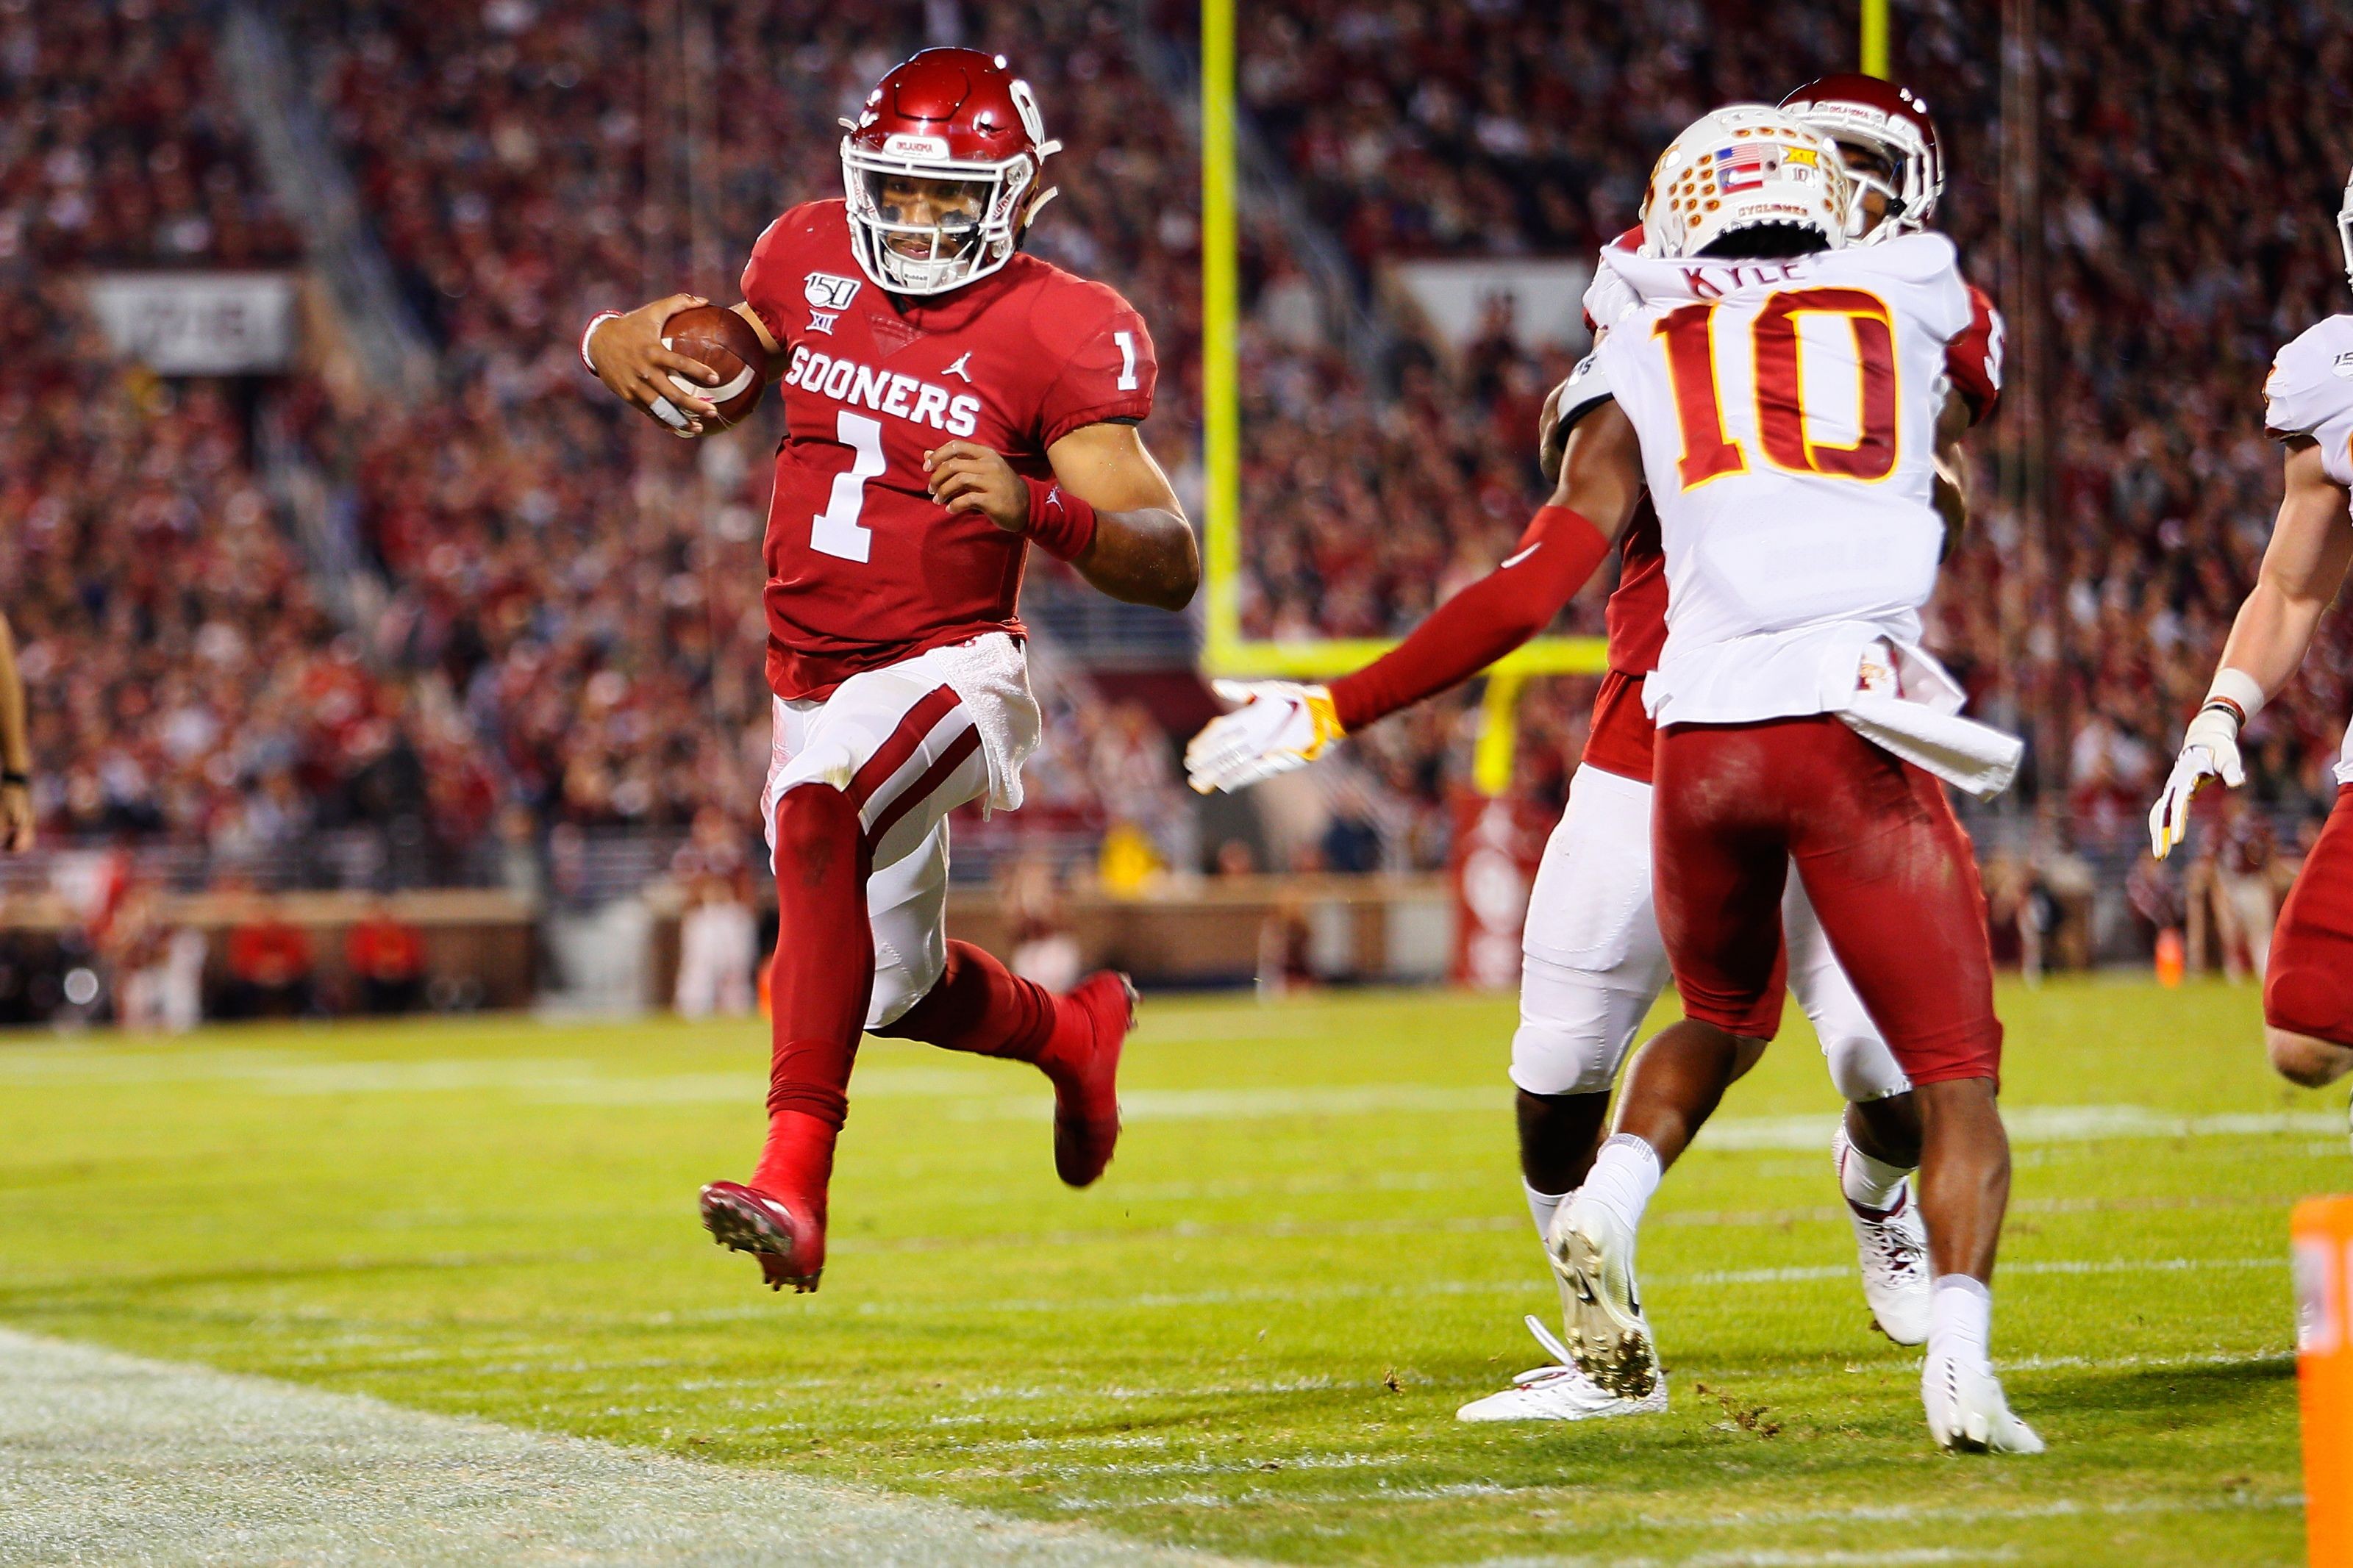 Oklahoma football What do latest CFP rankings mean for OU?